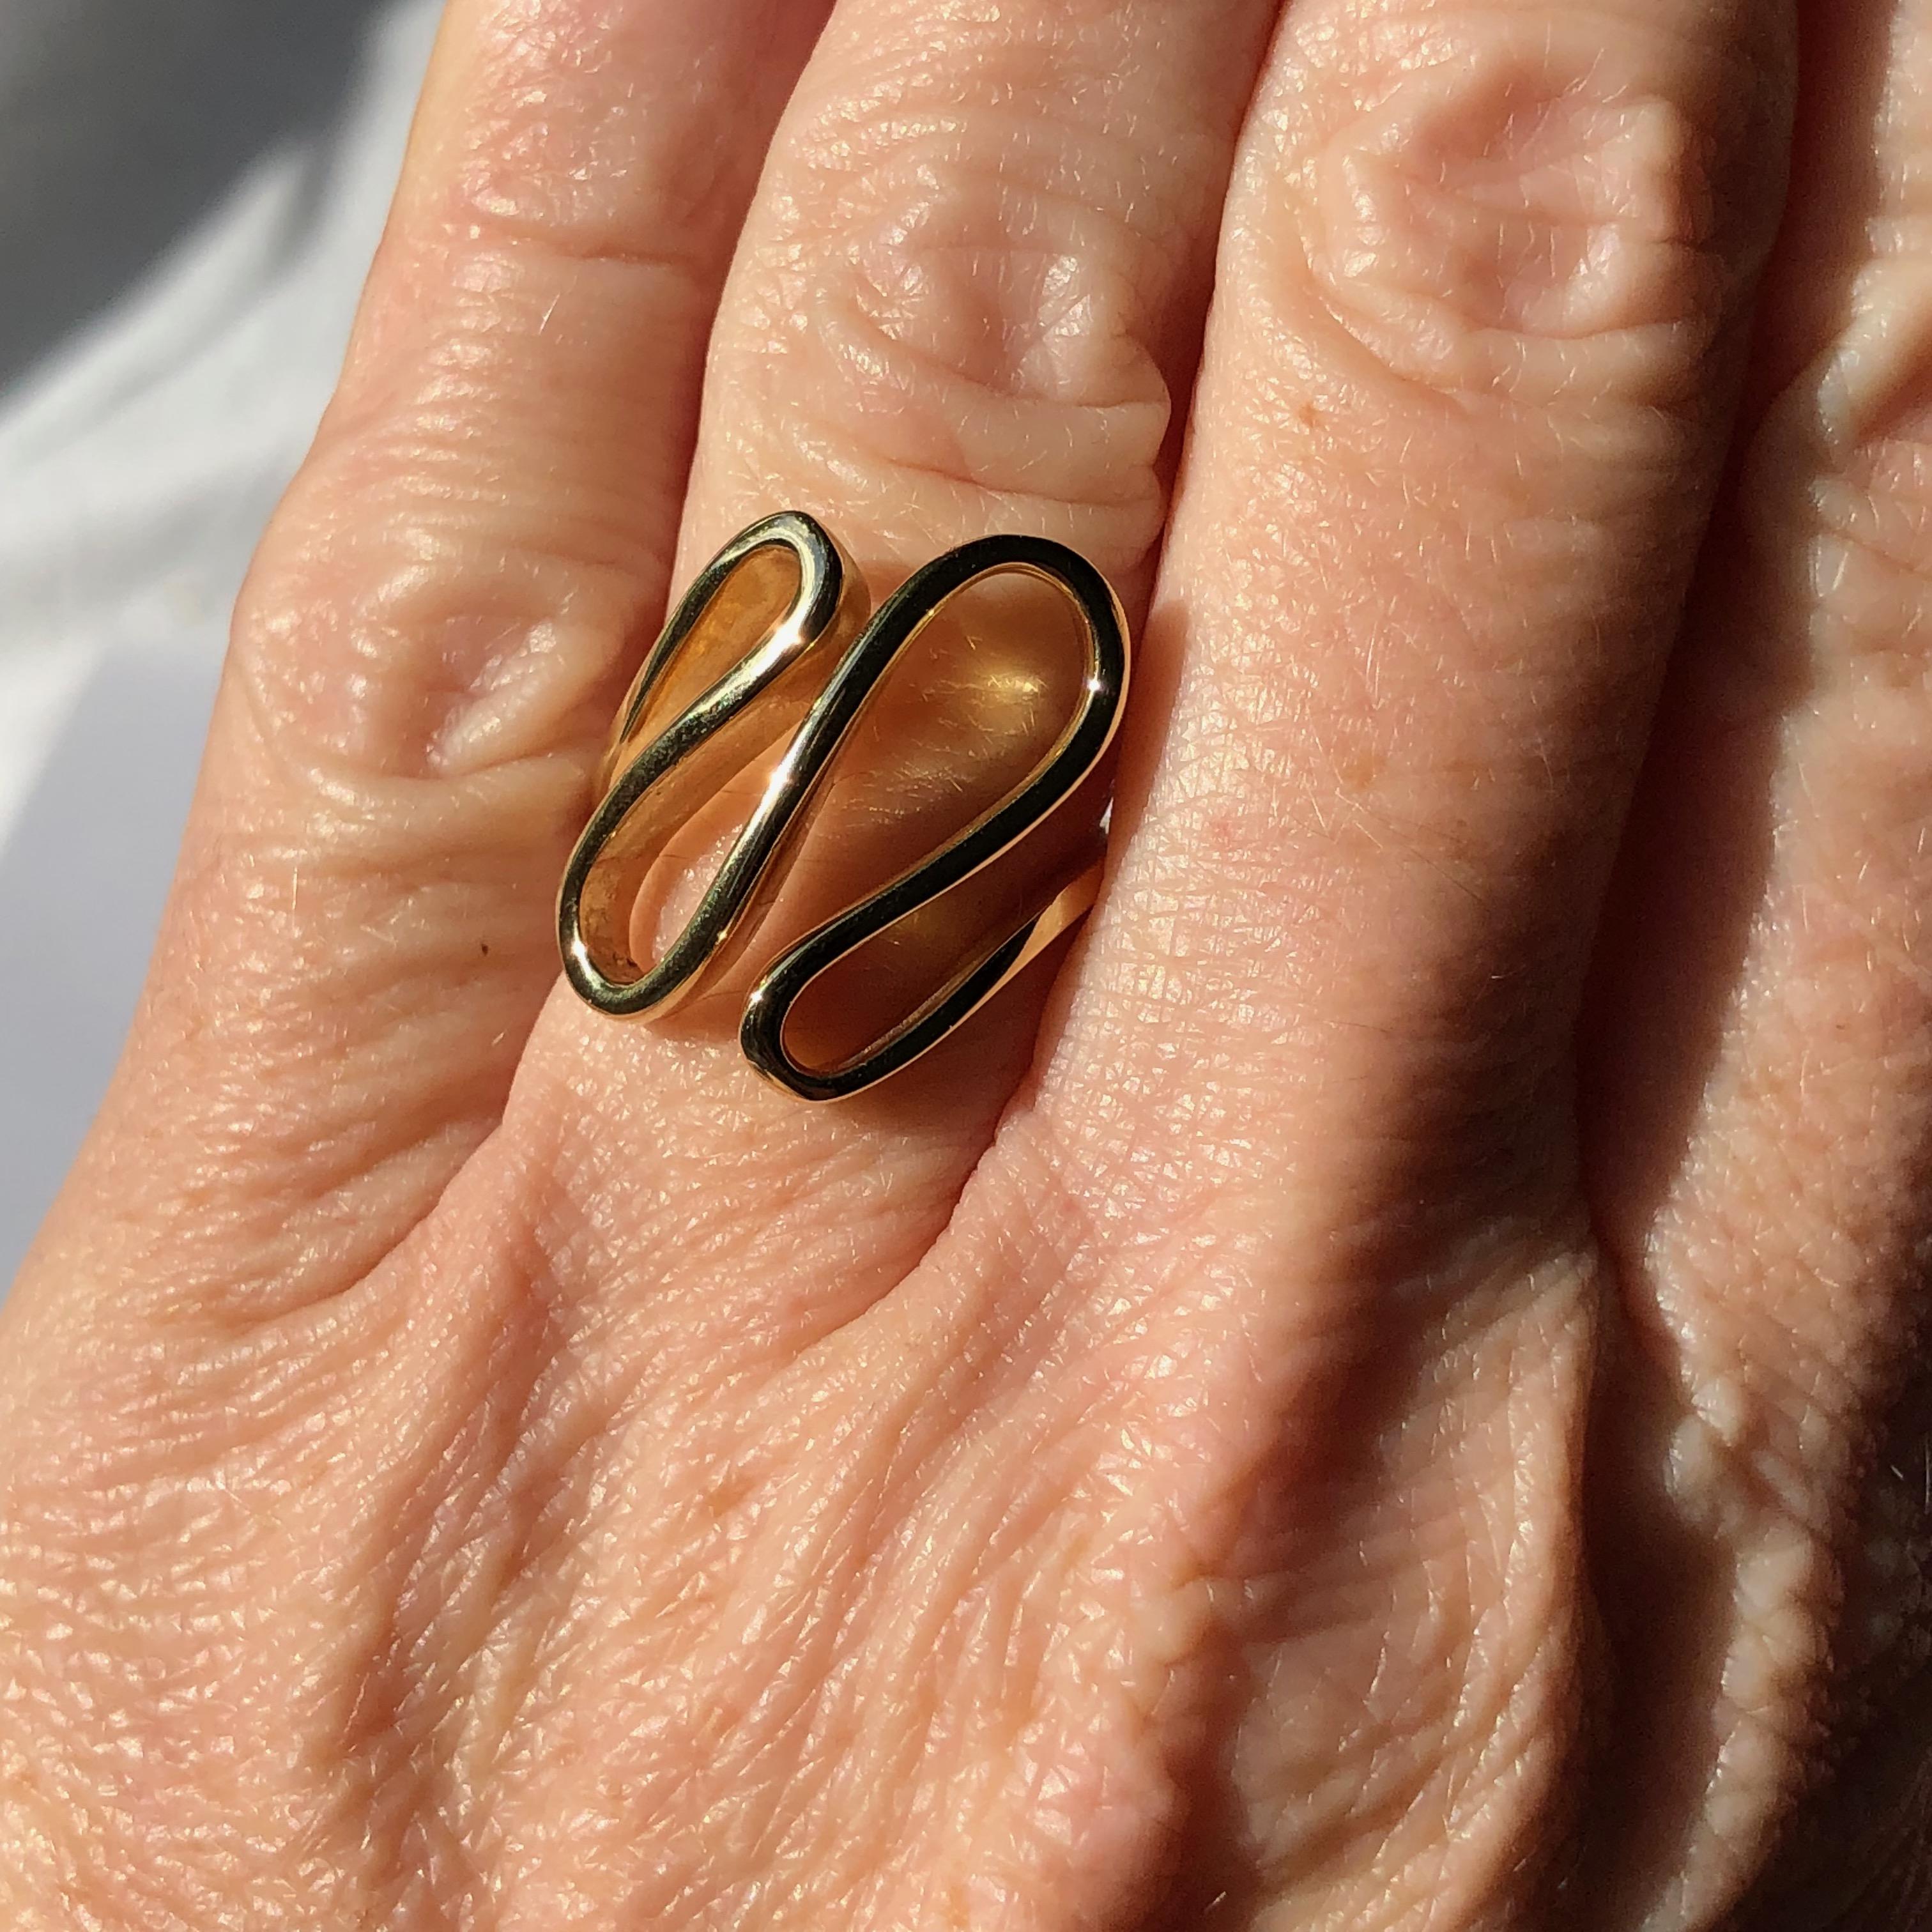 A Stylised Scrolling Length Of Gold Fashioned Into A Fabulous Undulating Ring 

18k Yellow Gold 

Currently Size P This Can be Altered To Your Perfect Size By Our In House Team


We Are Happy To Offer A free Sizing Service With This Piece - The Ring